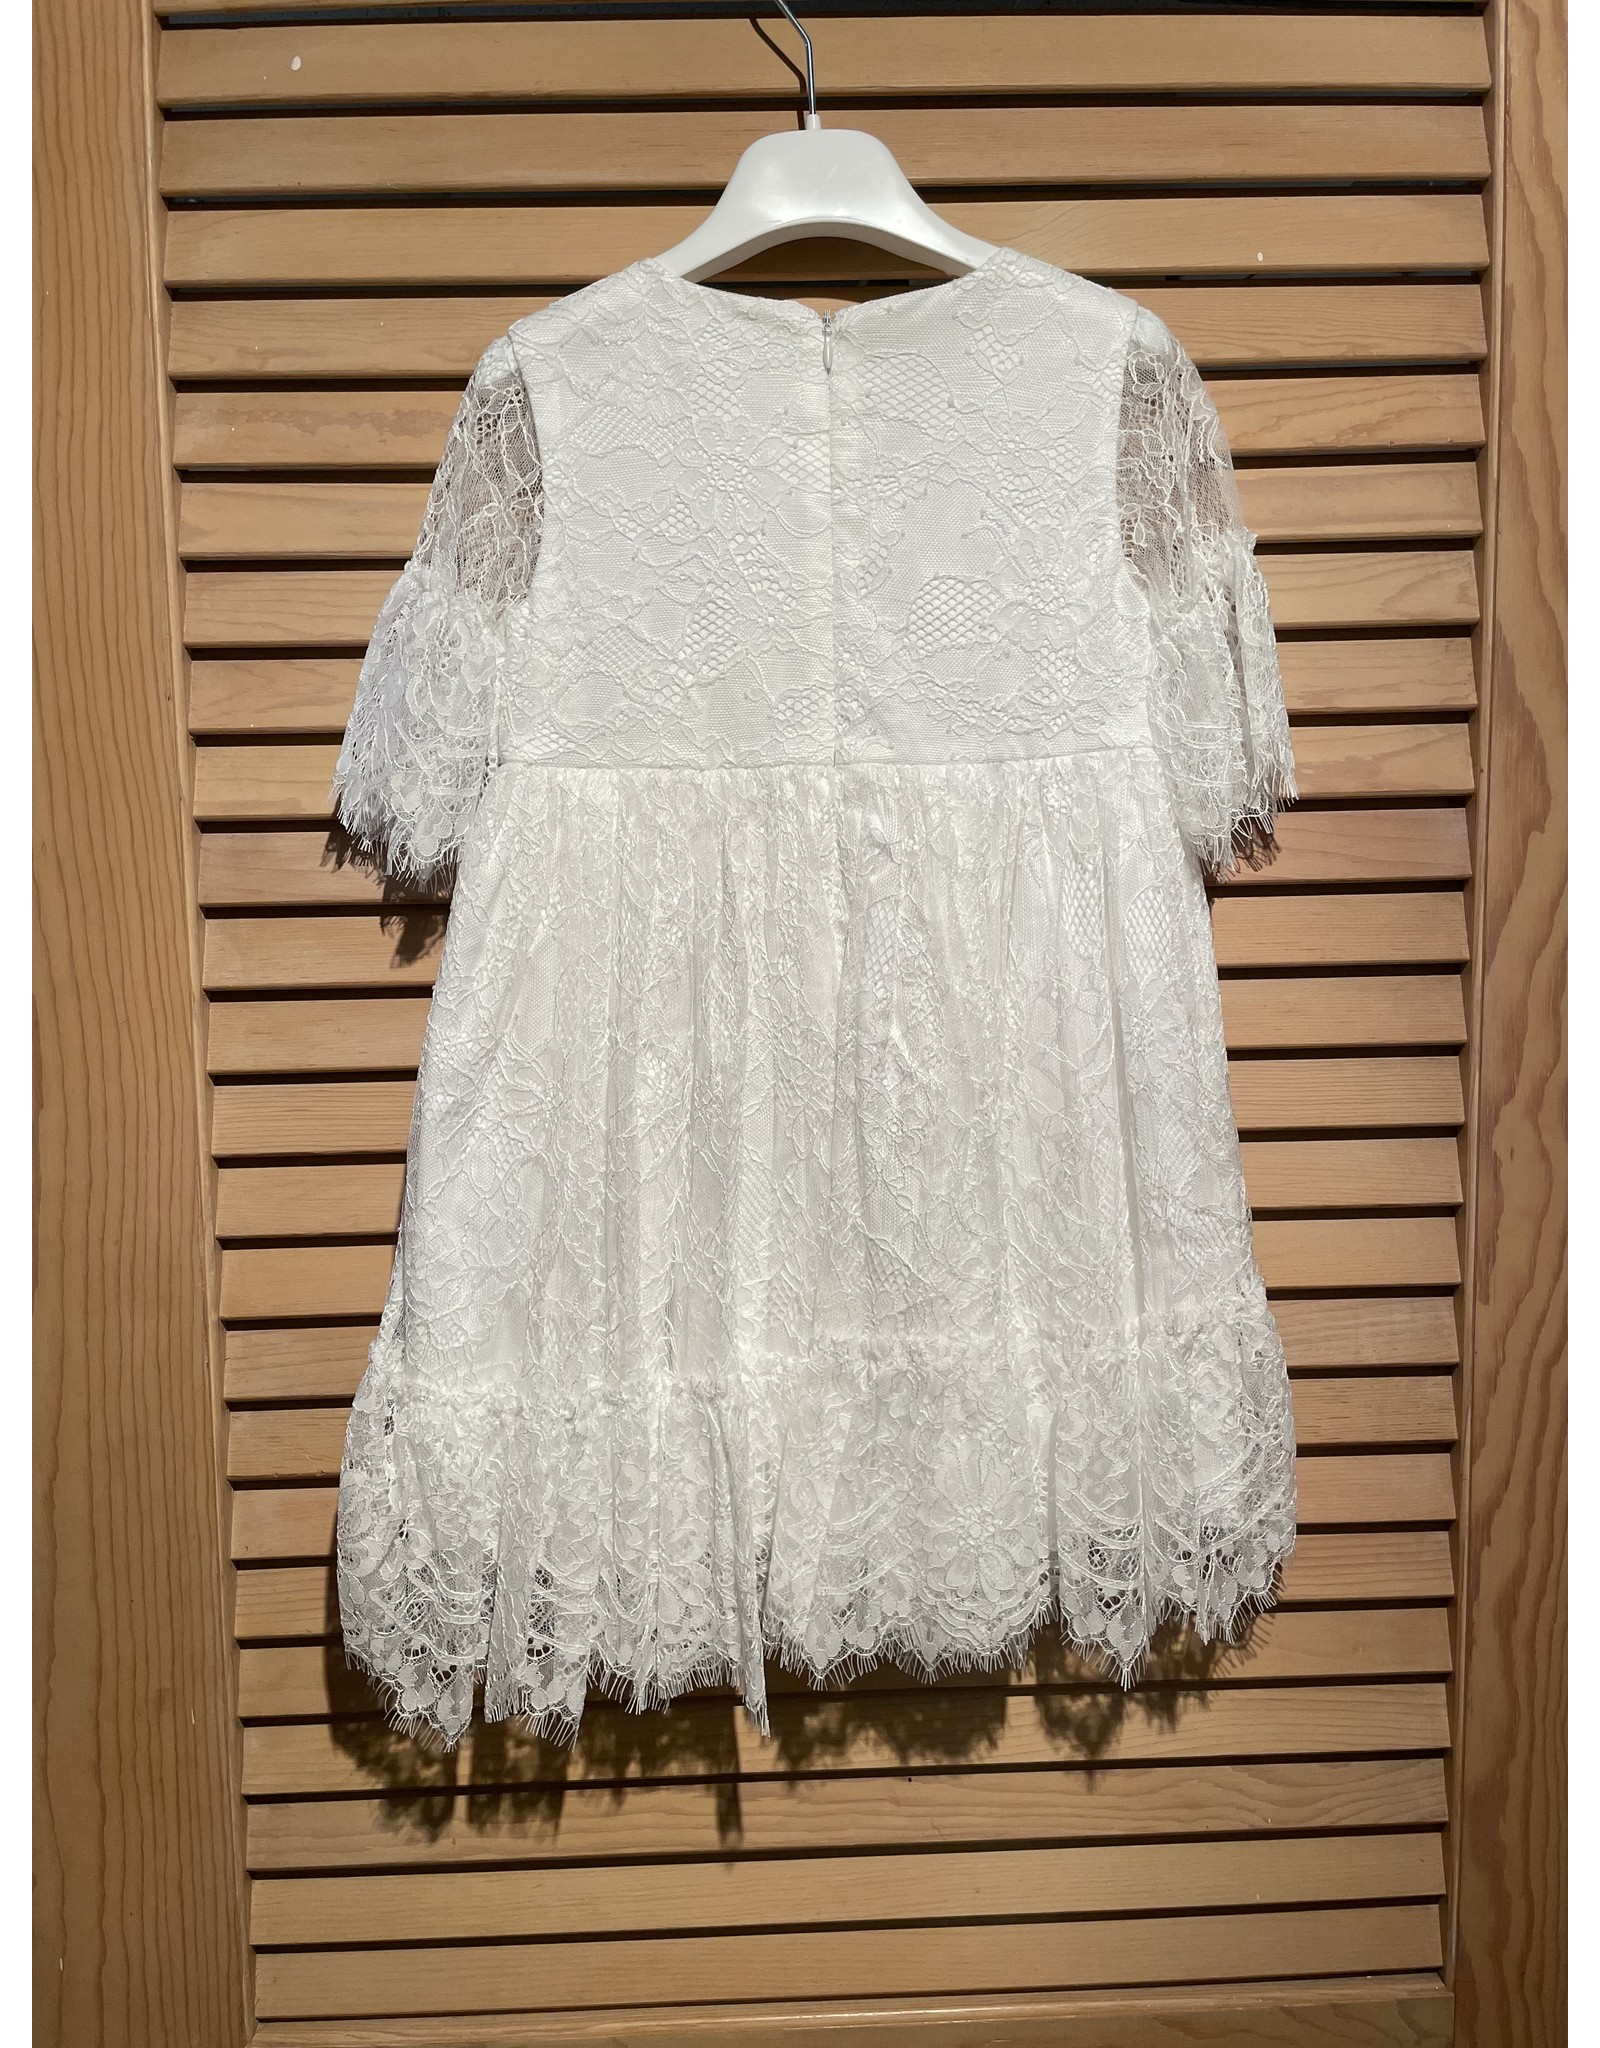 Abel & Lula White Floral Embroidered Dress with Lace Sleeve